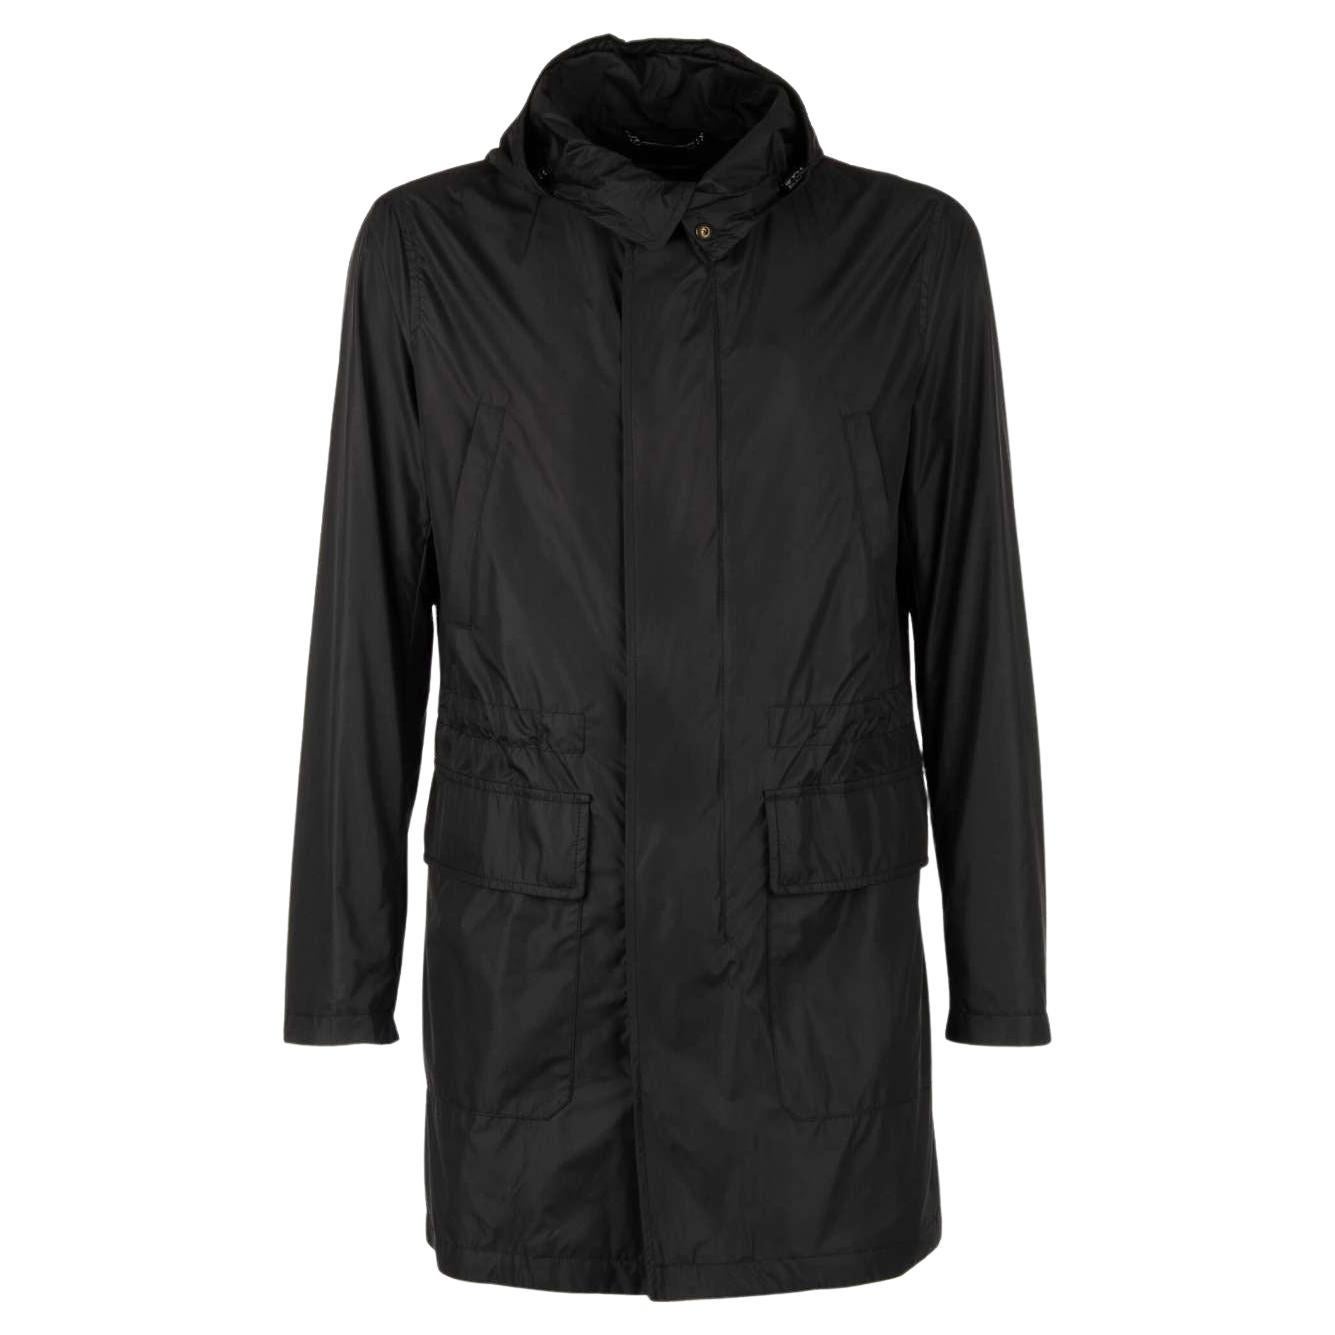 Dolce & Gabbana Classic Rain Parka Jacket with Pockets and Hoody Black 46 For Sale